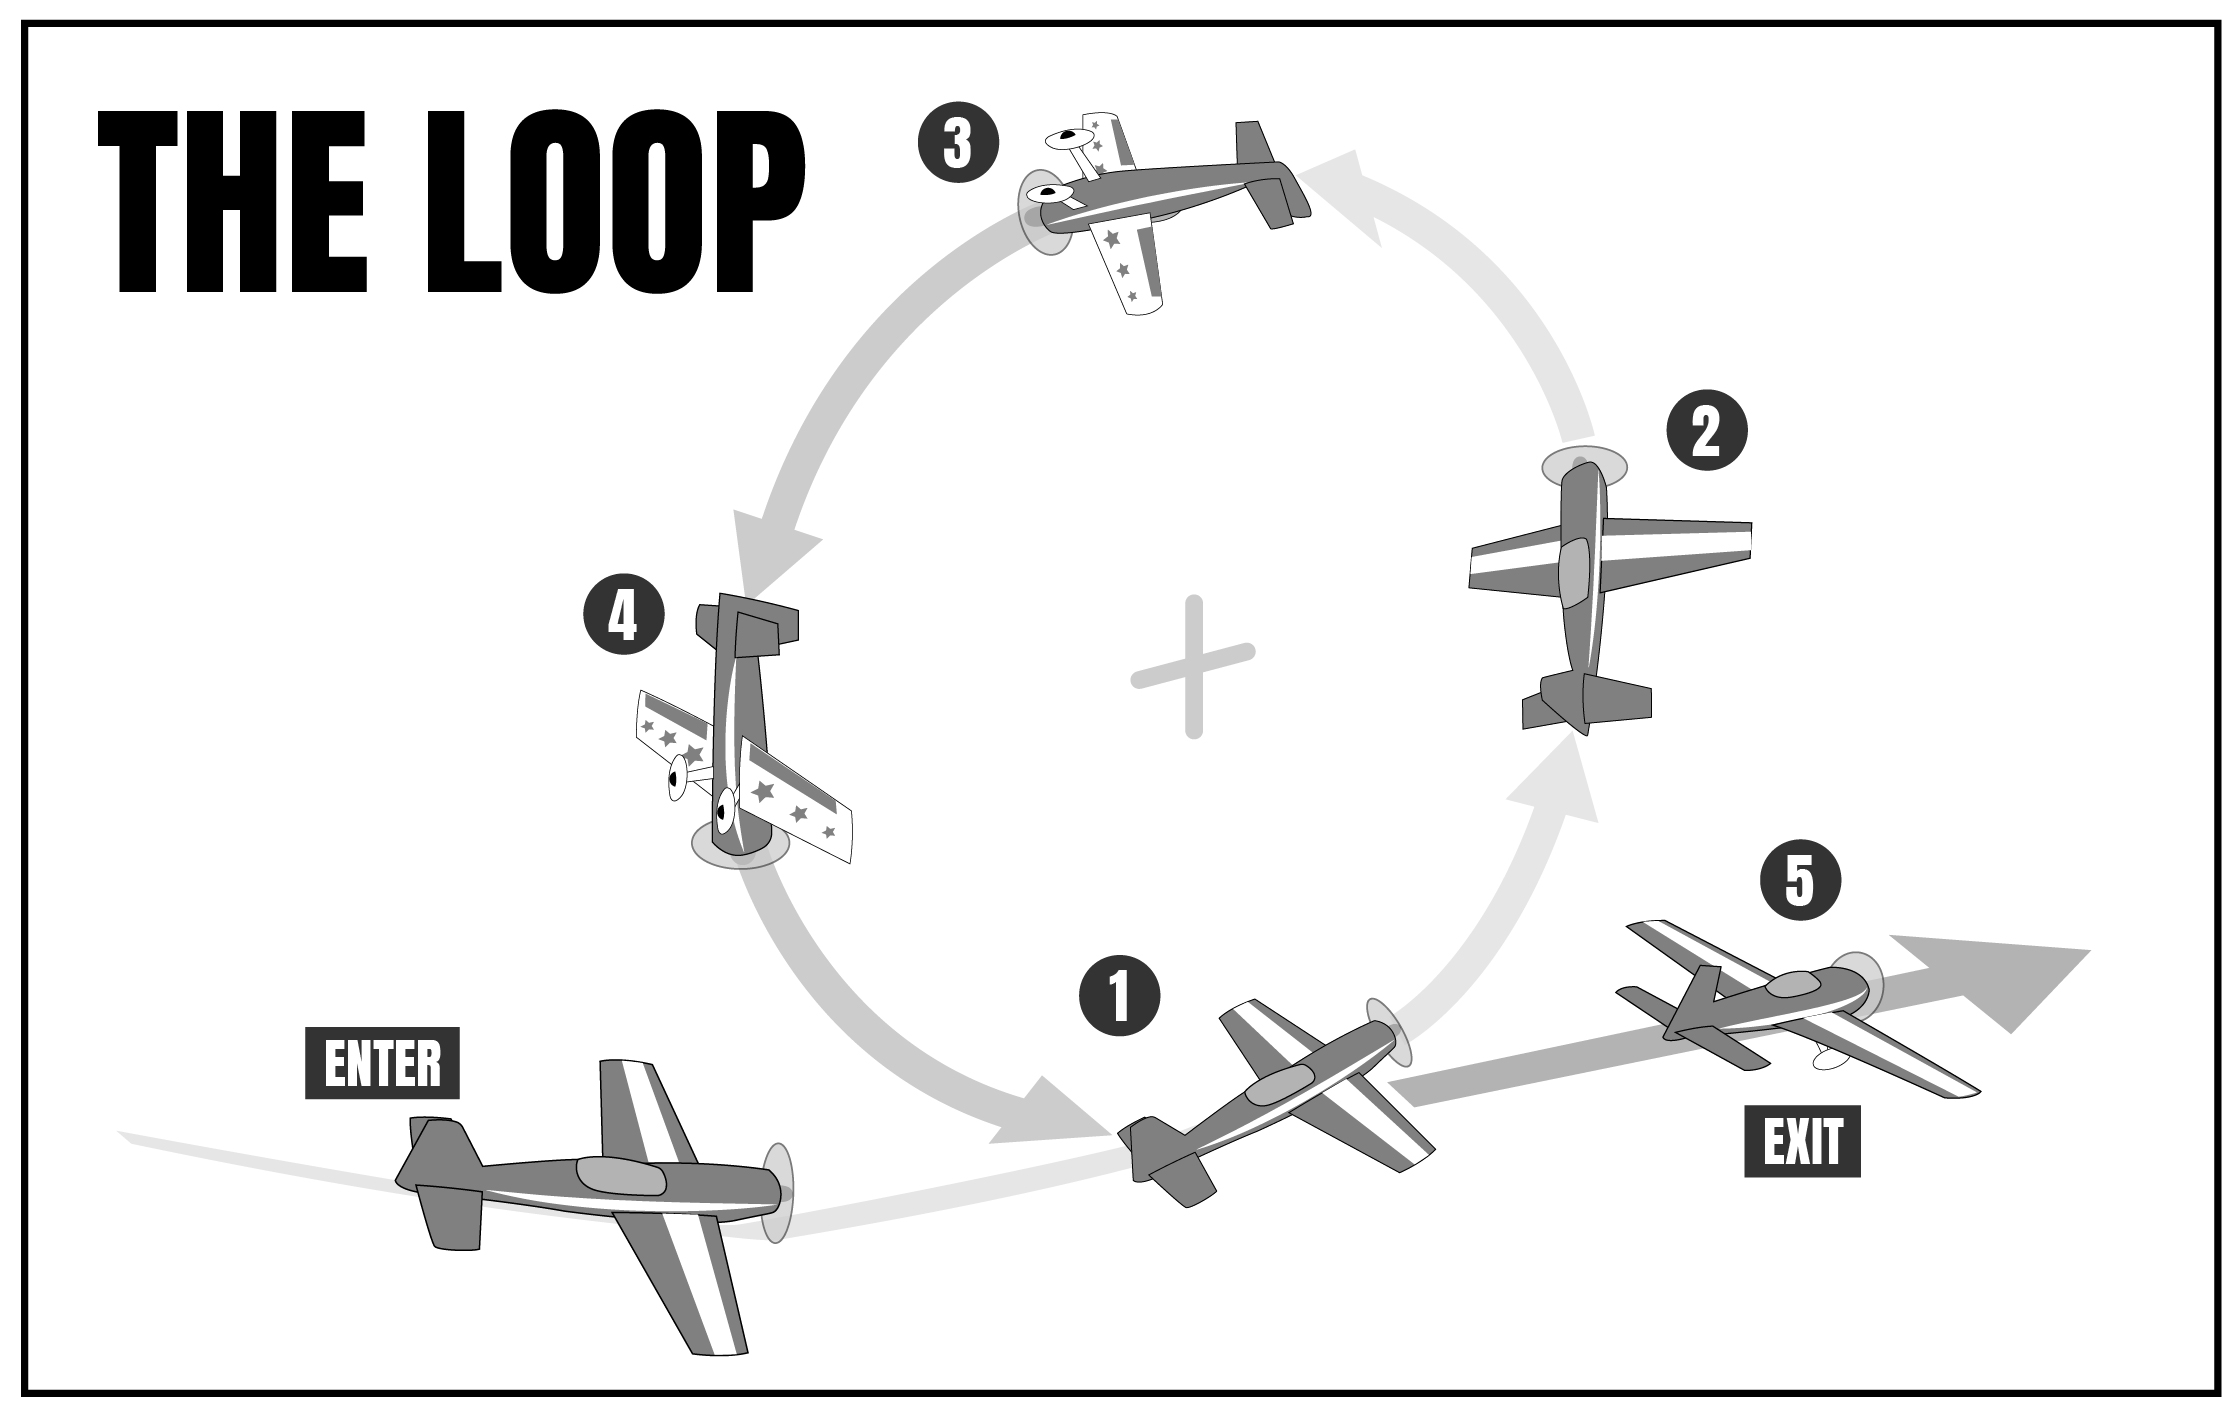 File:Four different aerobatic roll diagrams from pilots view.jpg - Wikipedia